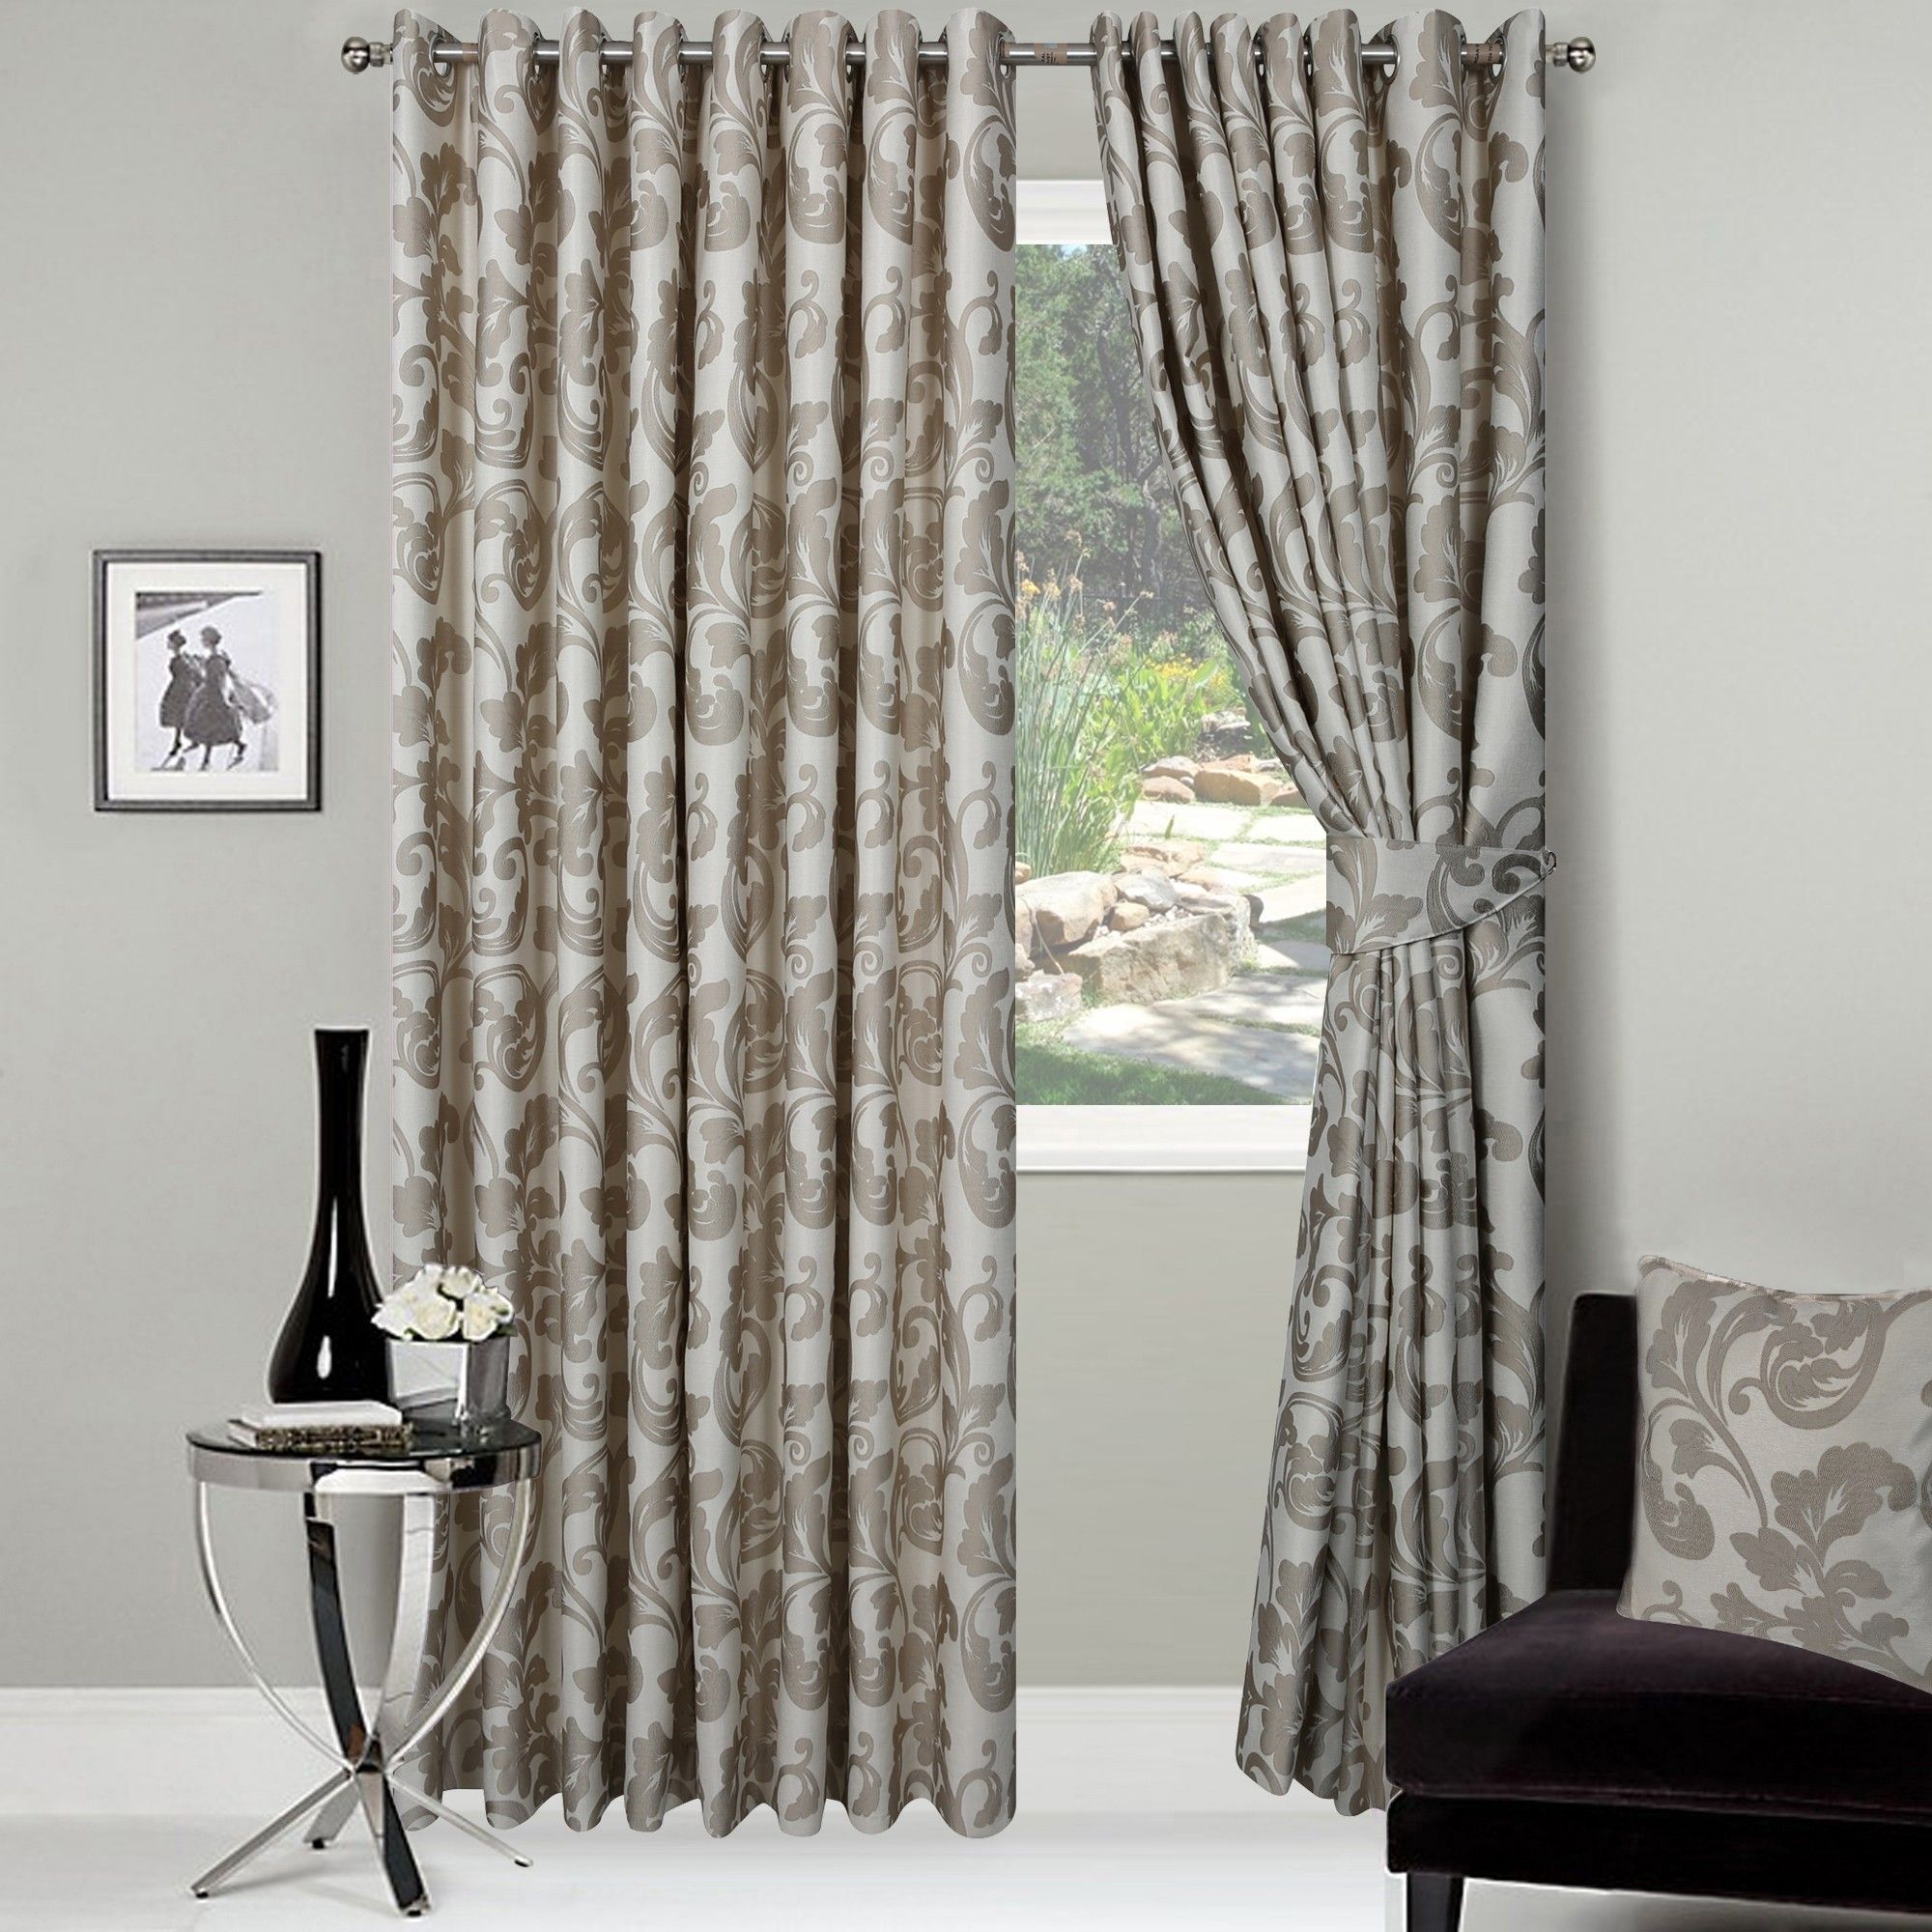 15 Best Ideas Ready Made Curtains for Large Bay Windows